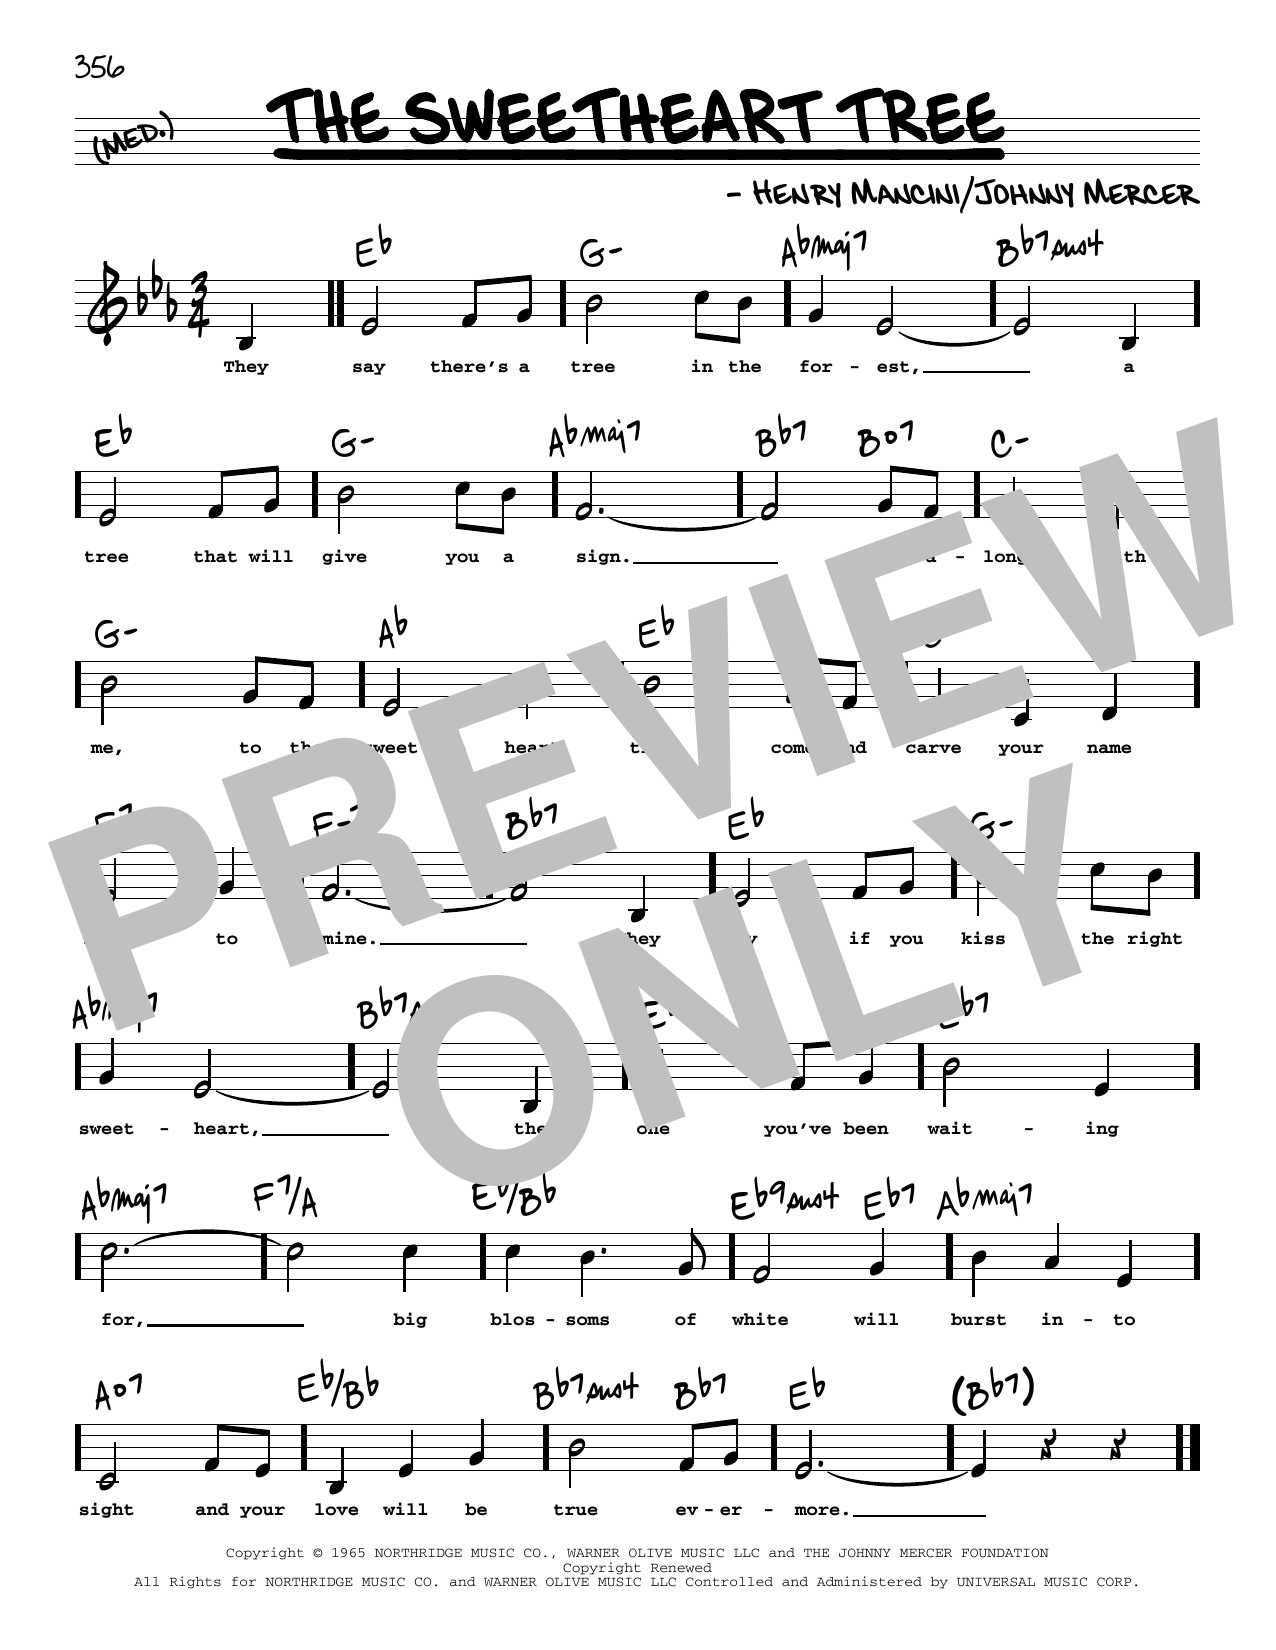 Henry Mancini The Sweetheart Tree Low Voice Sheet Music Chords And Lyrics Download Pdf Free 